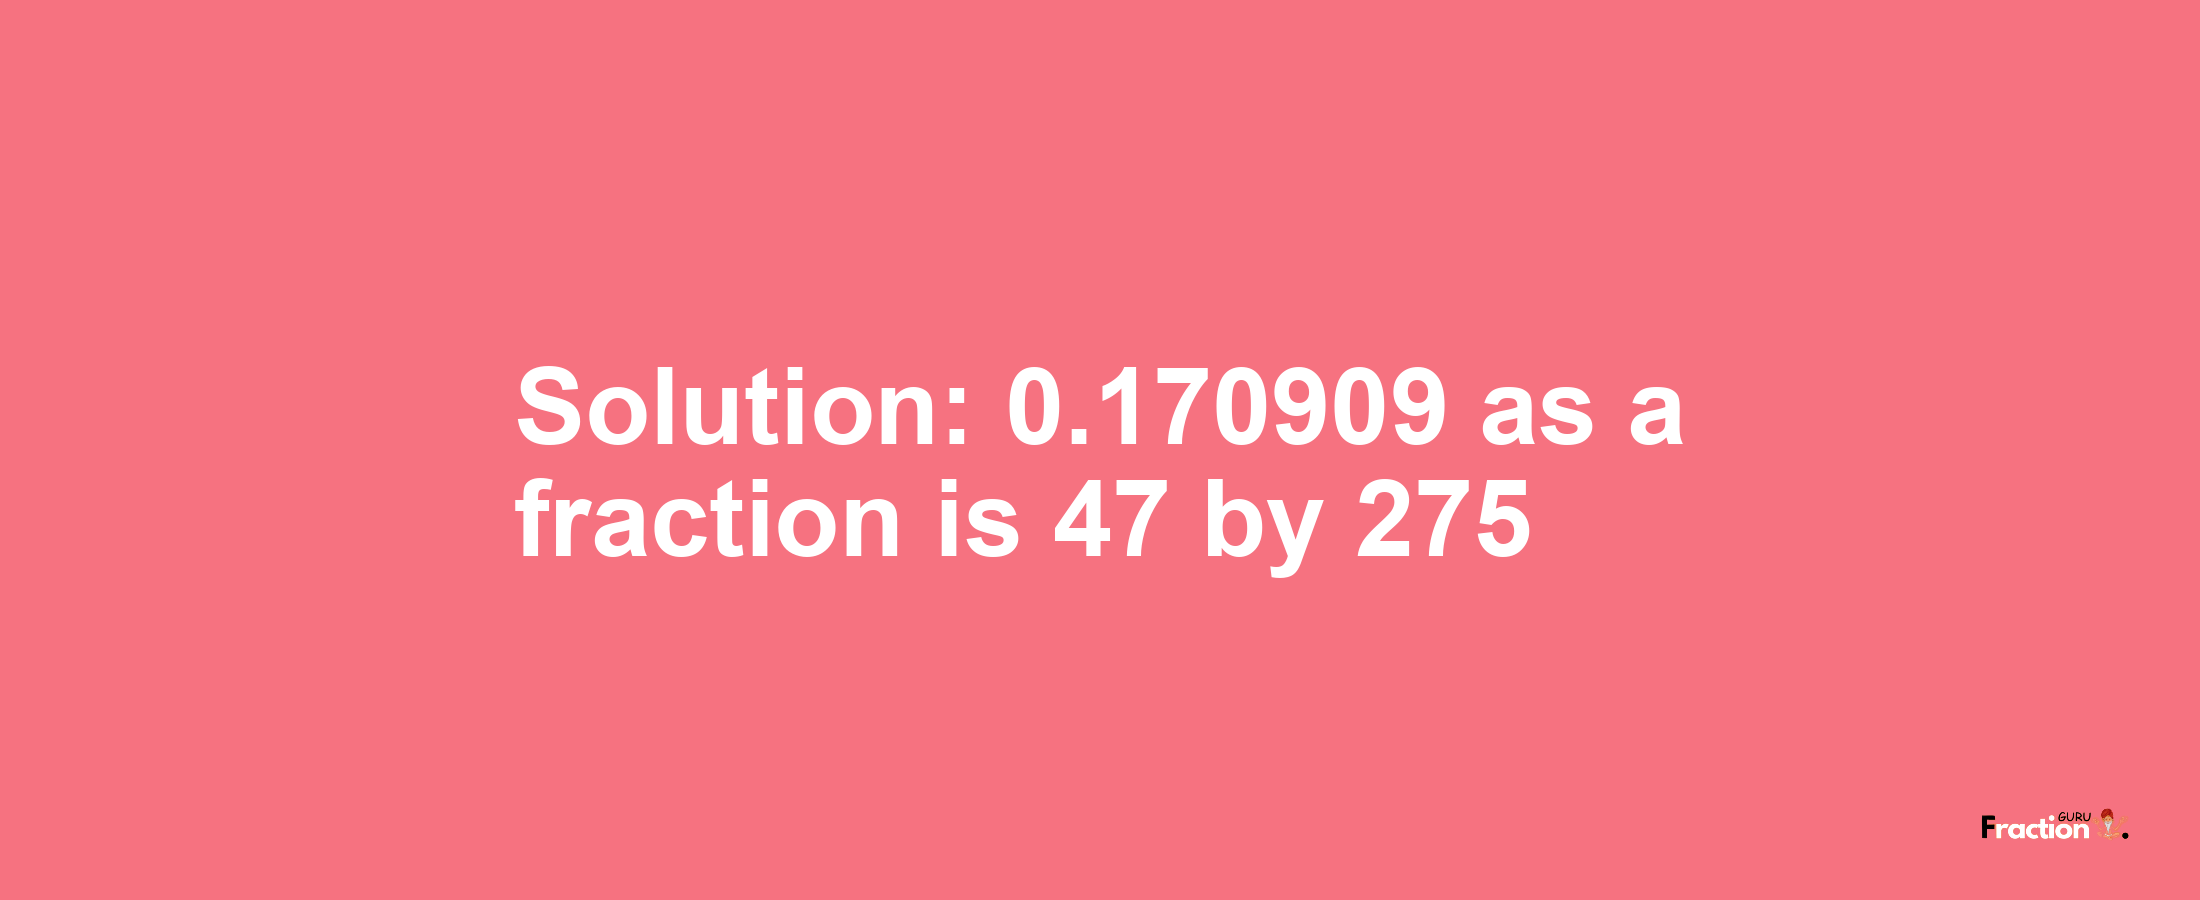 Solution:0.170909 as a fraction is 47/275